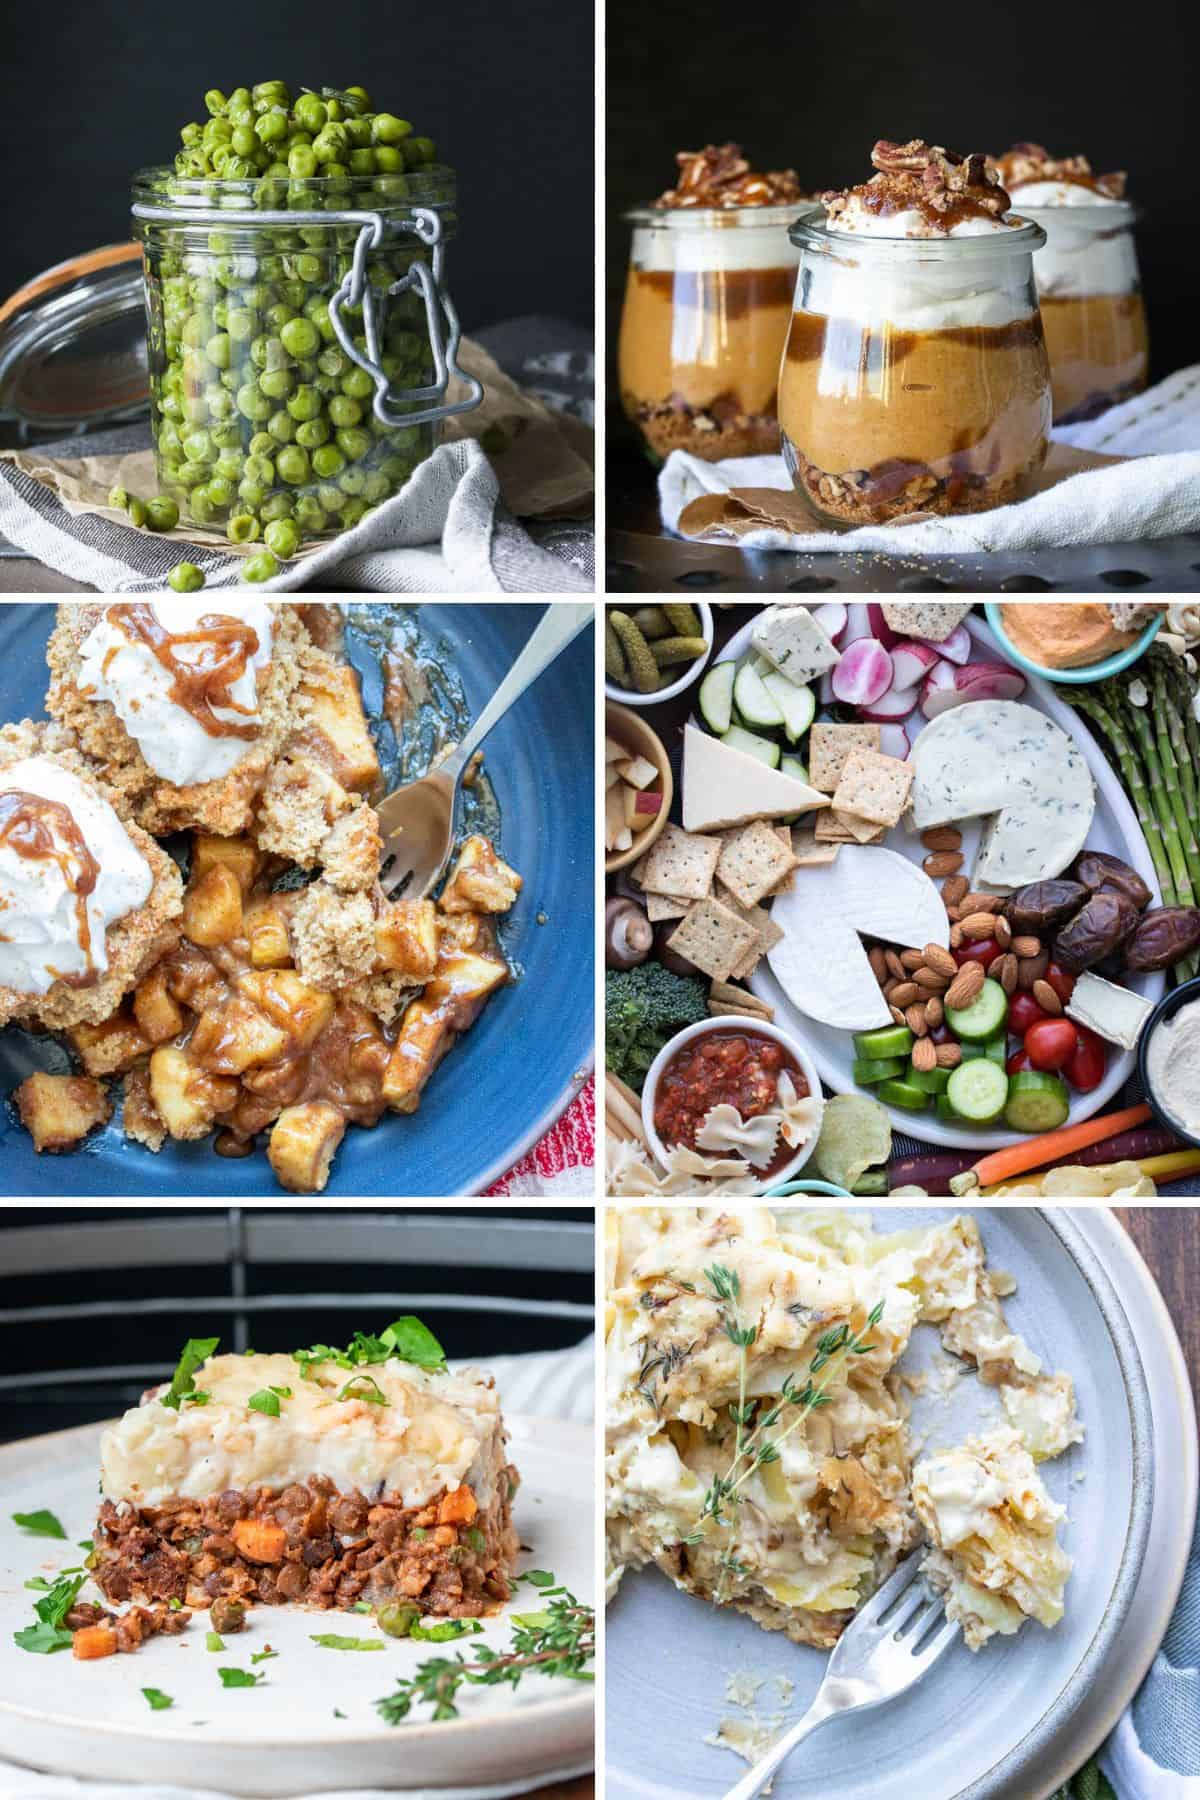 A collage of different Thanksgiving foods including one appetizer, two side dishes, a main dish and two desserts.